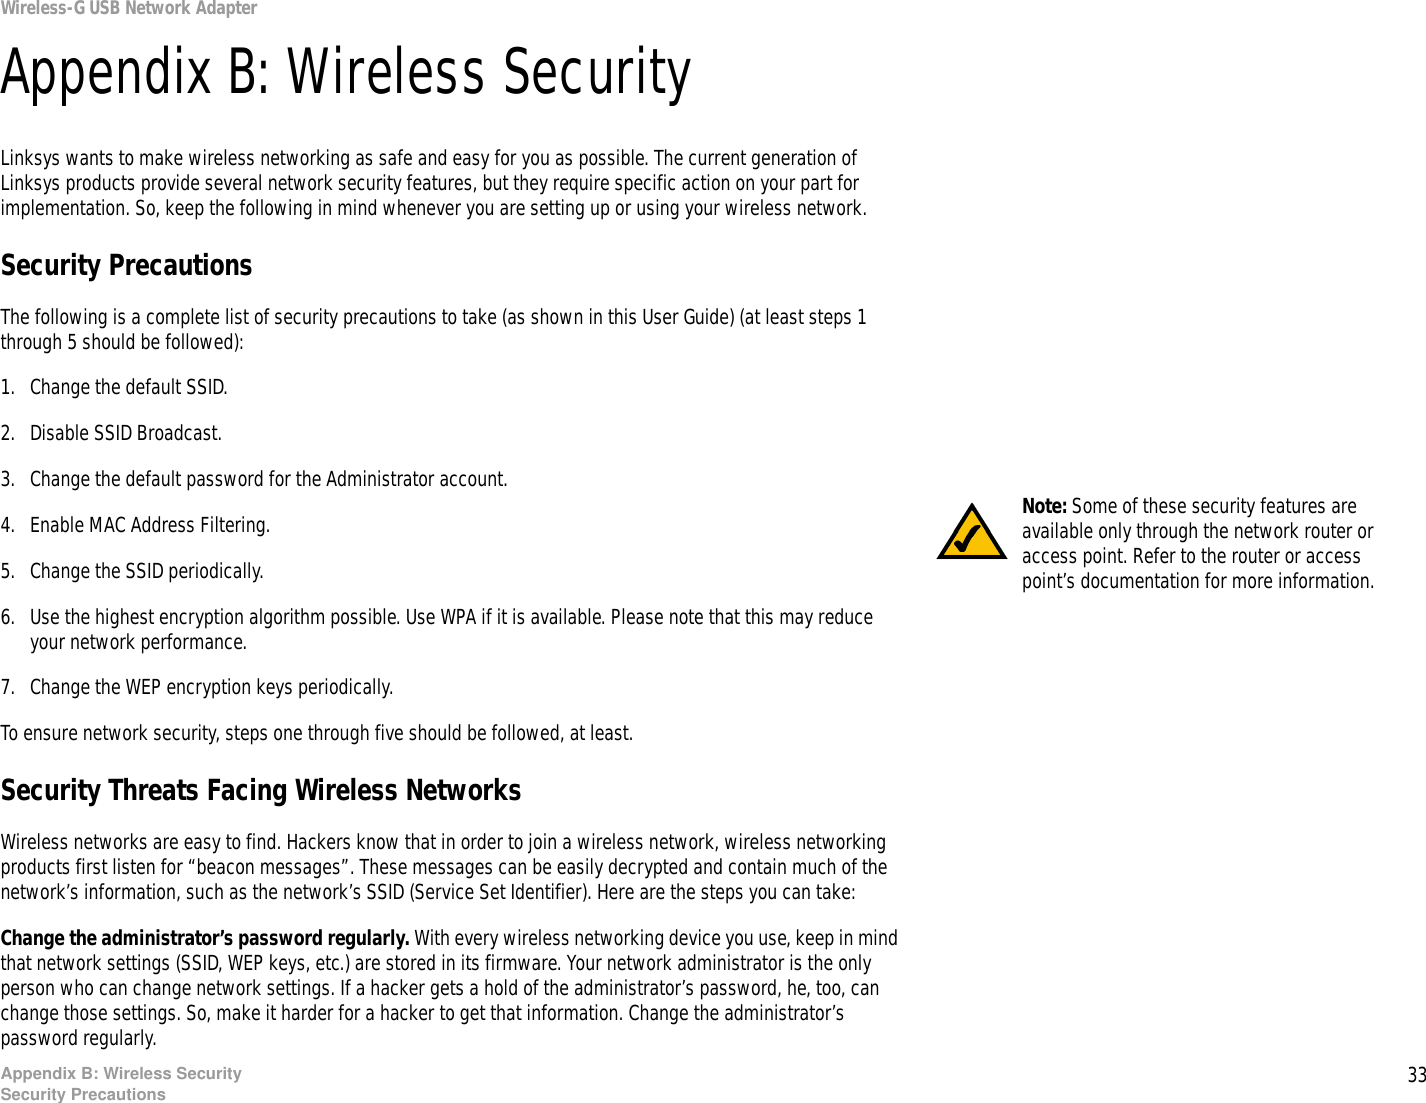 33Appendix B: Wireless SecuritySecurity PrecautionsWireless-G USB Network AdapterAppendix B: Wireless SecurityLinksys wants to make wireless networking as safe and easy for you as possible. The current generation of Linksys products provide several network security features, but they require specific action on your part for implementation. So, keep the following in mind whenever you are setting up or using your wireless network.Security PrecautionsThe following is a complete list of security precautions to take (as shown in this User Guide) (at least steps 1 through 5 should be followed):1. Change the default SSID. 2. Disable SSID Broadcast. 3. Change the default password for the Administrator account. 4. Enable MAC Address Filtering. 5. Change the SSID periodically. 6. Use the highest encryption algorithm possible. Use WPA if it is available. Please note that this may reduce your network performance. 7. Change the WEP encryption keys periodically. To ensure network security, steps one through five should be followed, at least.Security Threats Facing Wireless Networks Wireless networks are easy to find. Hackers know that in order to join a wireless network, wireless networking products first listen for “beacon messages”. These messages can be easily decrypted and contain much of the network’s information, such as the network’s SSID (Service Set Identifier). Here are the steps you can take:Change the administrator’s password regularly. With every wireless networking device you use, keep in mind that network settings (SSID, WEP keys, etc.) are stored in its firmware. Your network administrator is the only person who can change network settings. If a hacker gets a hold of the administrator’s password, he, too, can change those settings. So, make it harder for a hacker to get that information. Change the administrator’s password regularly.Note: Some of these security features are available only through the network router or access point. Refer to the router or access point’s documentation for more information.